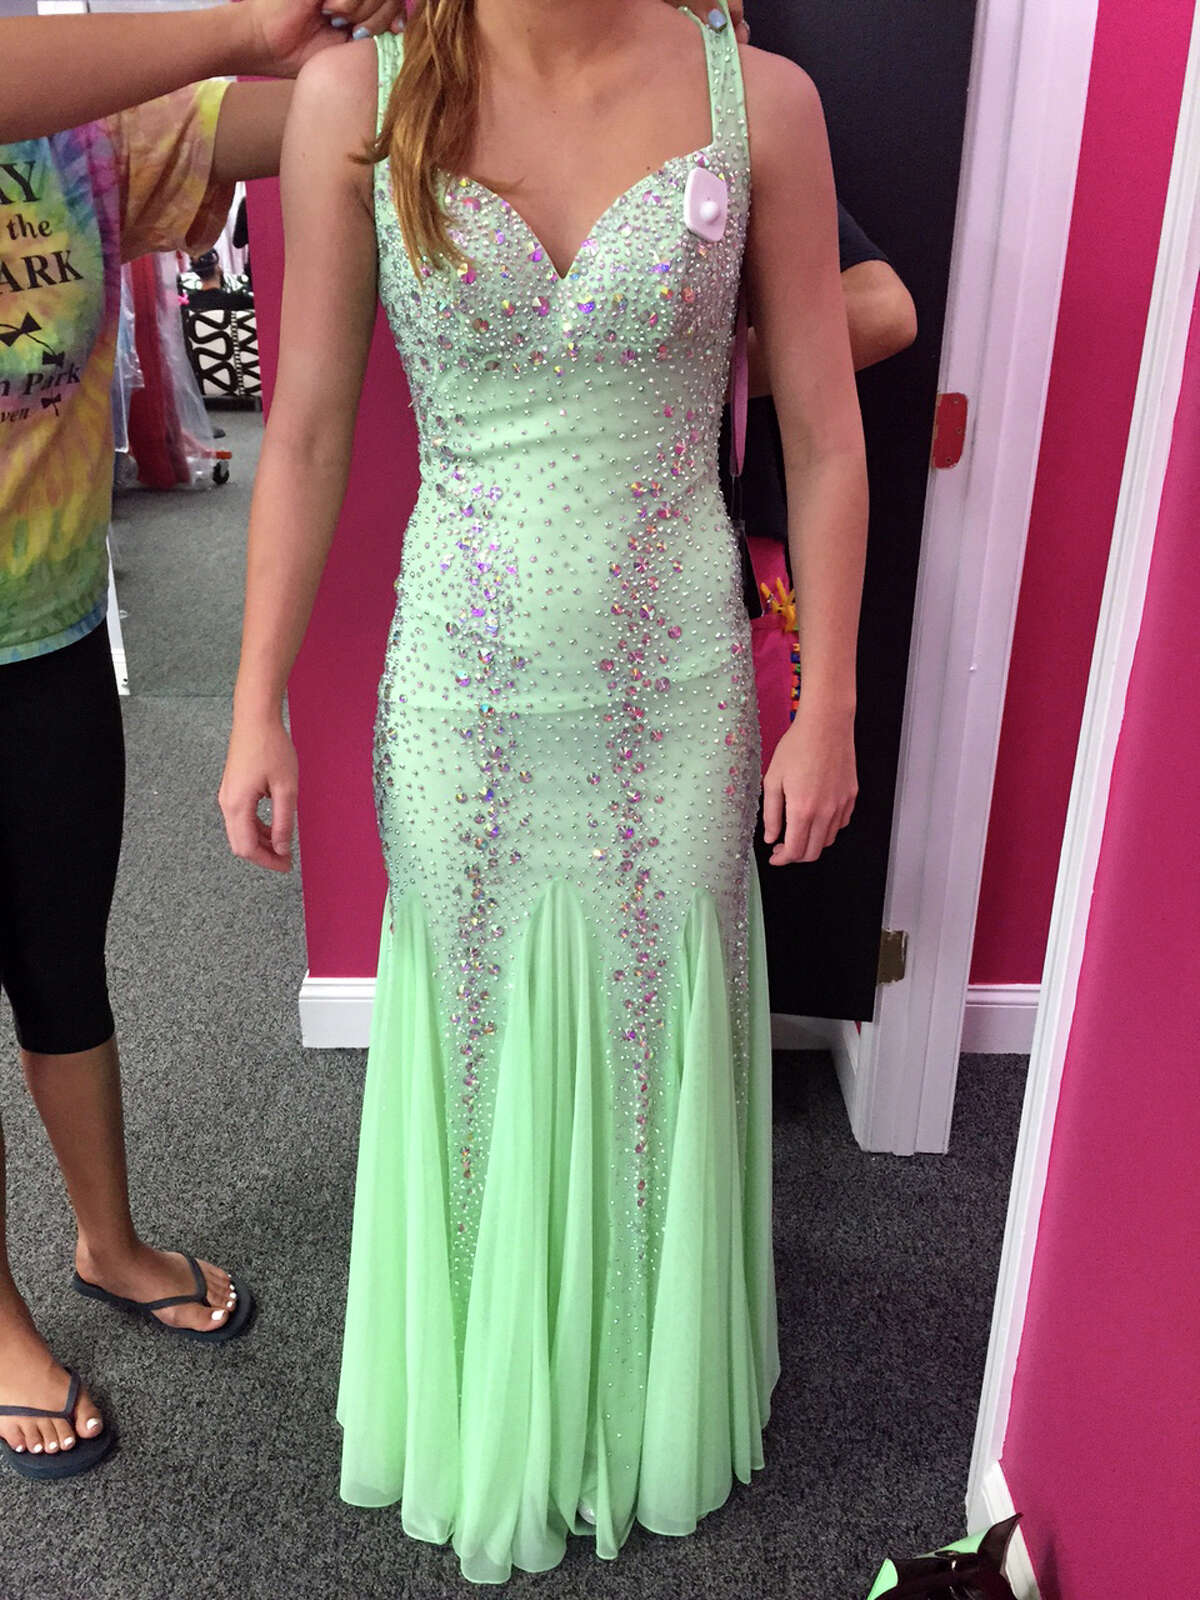 Kylee Opper has her prom dress altered to meet the dress code standard set by the Shelton, Conn. school system. Opper's mother, Trisha Marina, assumed this dress which was purchased after the first one was banned in 2015, would pass muster because only the back was exposed, not the front.